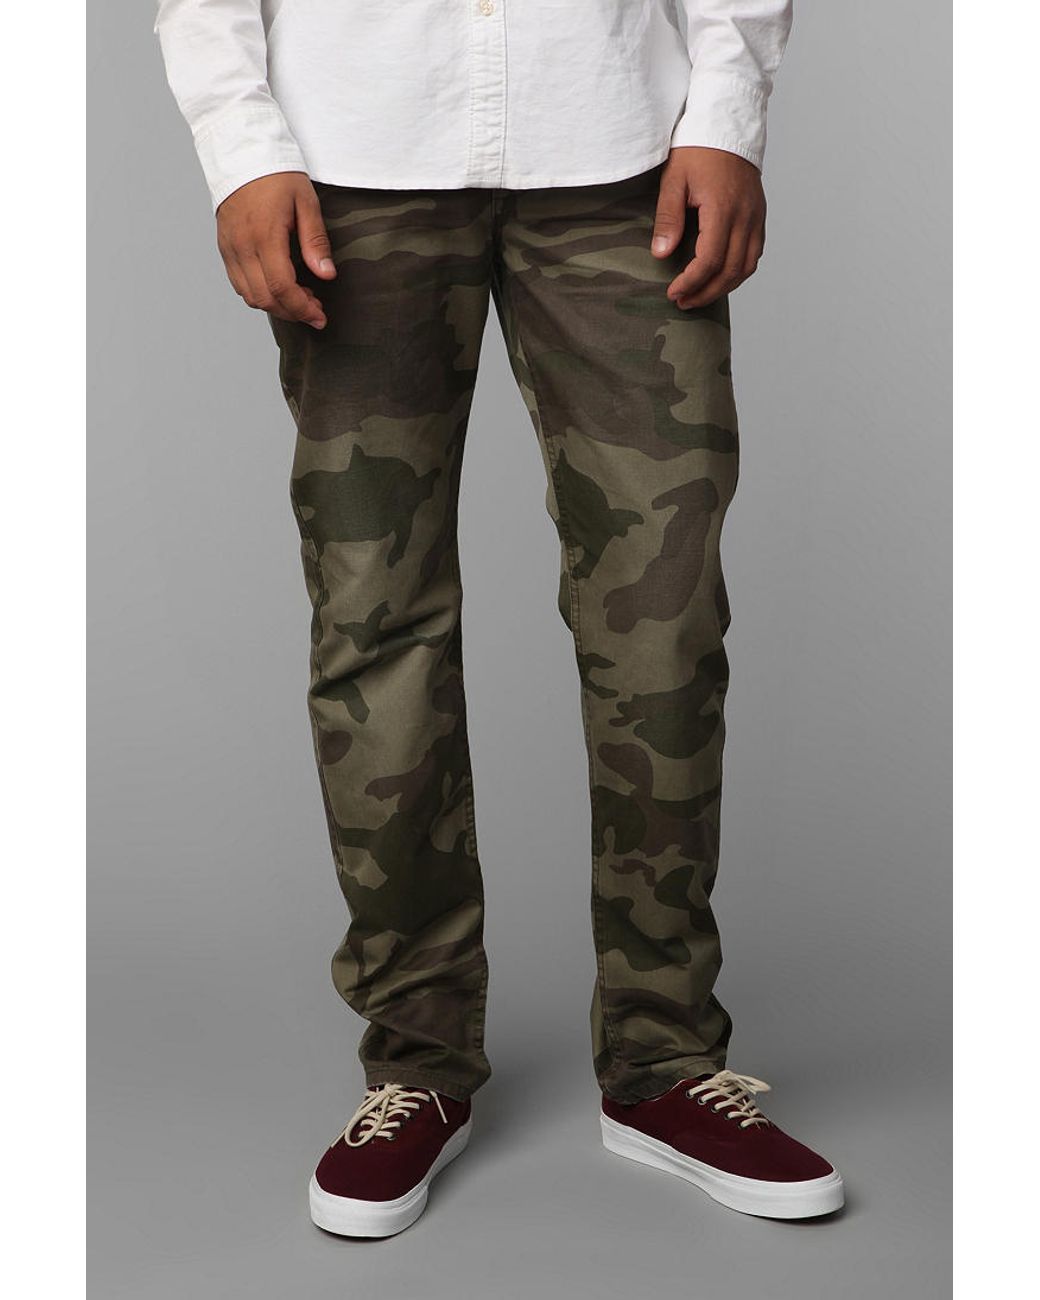 Urban Outfitters Dockers Camo Alpha Khaki Pant for Men | Lyst